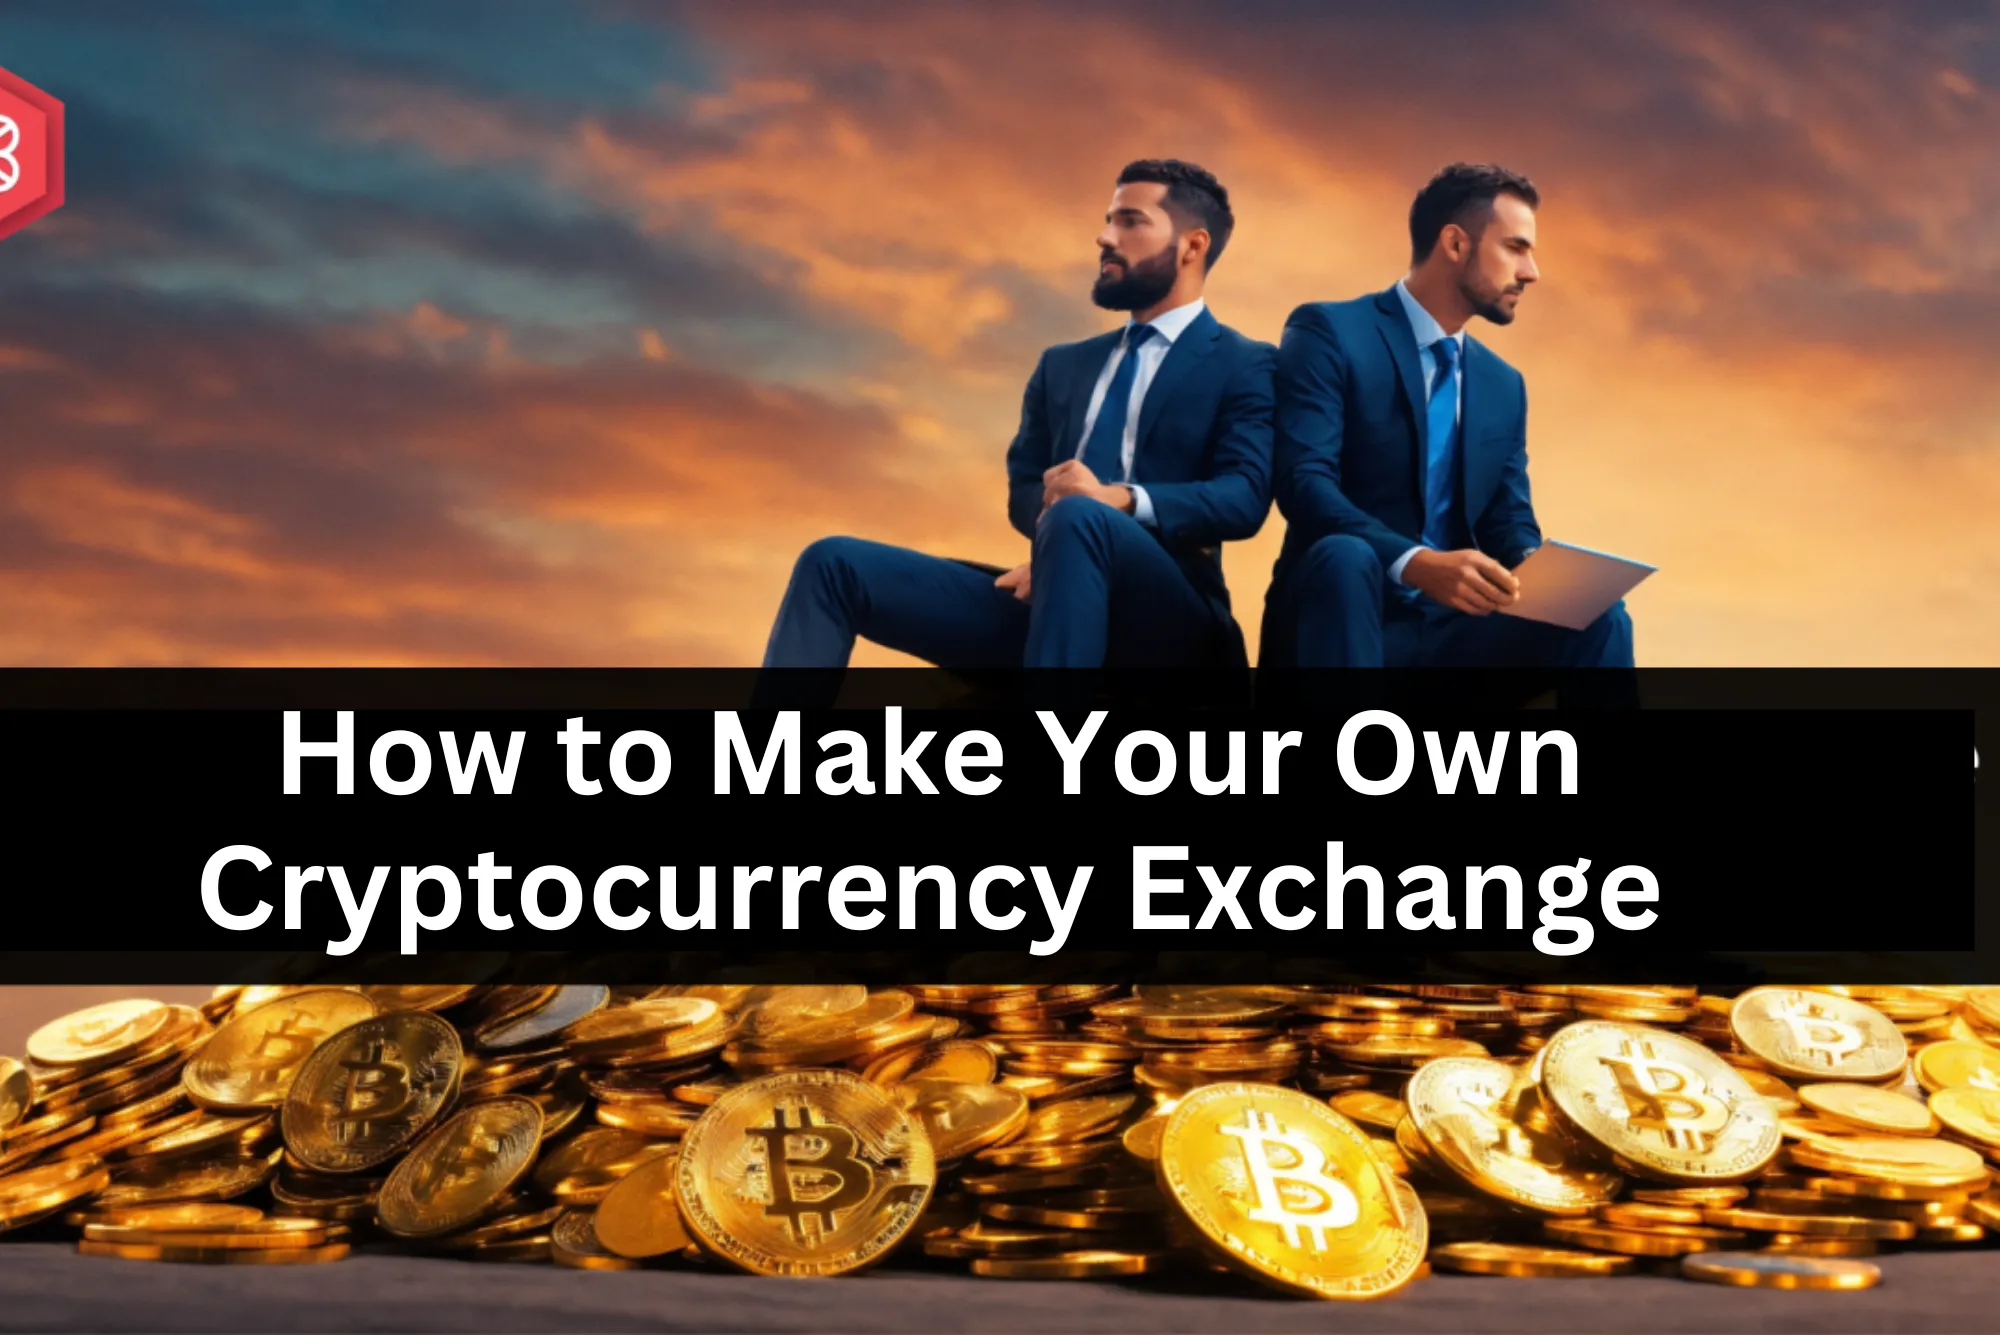 How to Make Your Own Cryptocurrency Exchange